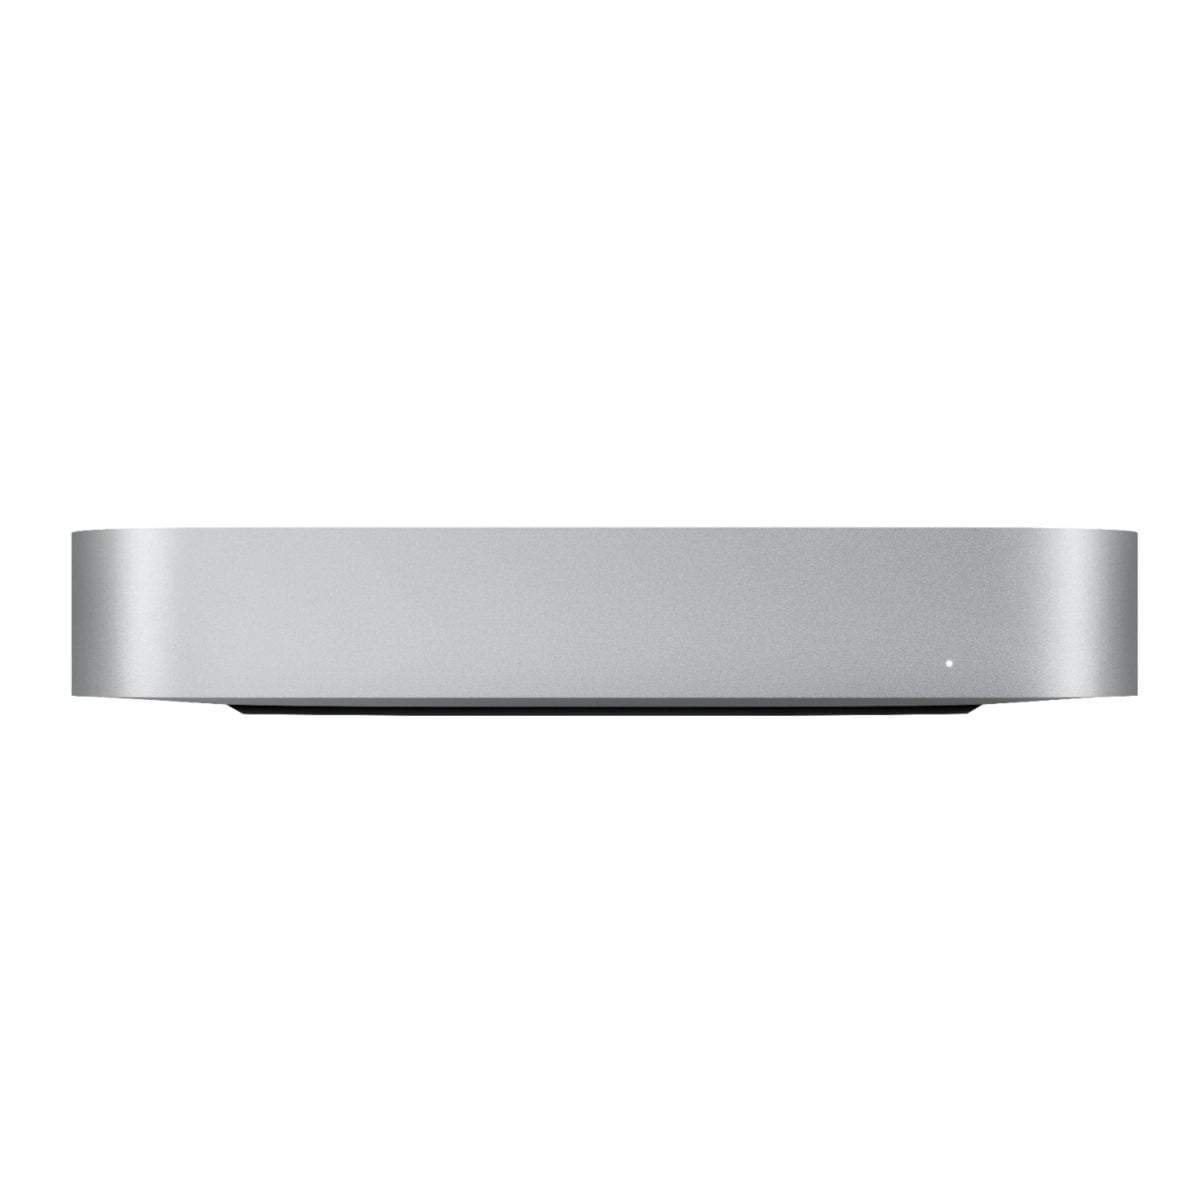 6427497Cv12D Scaled Apple &Lt;H1 Class=&Quot;Heading-5 V-Fw-Regular&Quot;&Gt;Mac Mini Desktop - Apple M1 Chip - 8Gb Memory - 512 Gb Ssd (Latest Model) - Silver&Lt;/H1&Gt; Https://Www.youtube.com/Watch?V=3Oq__Scnyna Mac Mini, The Most Versatile, Do-It-All Mac Desktop, To A Whole New Level Of Performance. With Up To 3X Faster Cpu Performance, Up To 6X Faster Graphics, A Powerful Neural Engine With Up To 15X Faster Machine Learning, And Superfast Unified Memory — All In An Ultracompact Design.so You Can Create, Work, And Play On Mac Mini With Speed And Power Beyond Anything You Ever Imagined. Mac Mini Mac Mini Desktop - Apple M1 Chip - 8Gb Memory - 512 Gb Ssd - Mgnt3